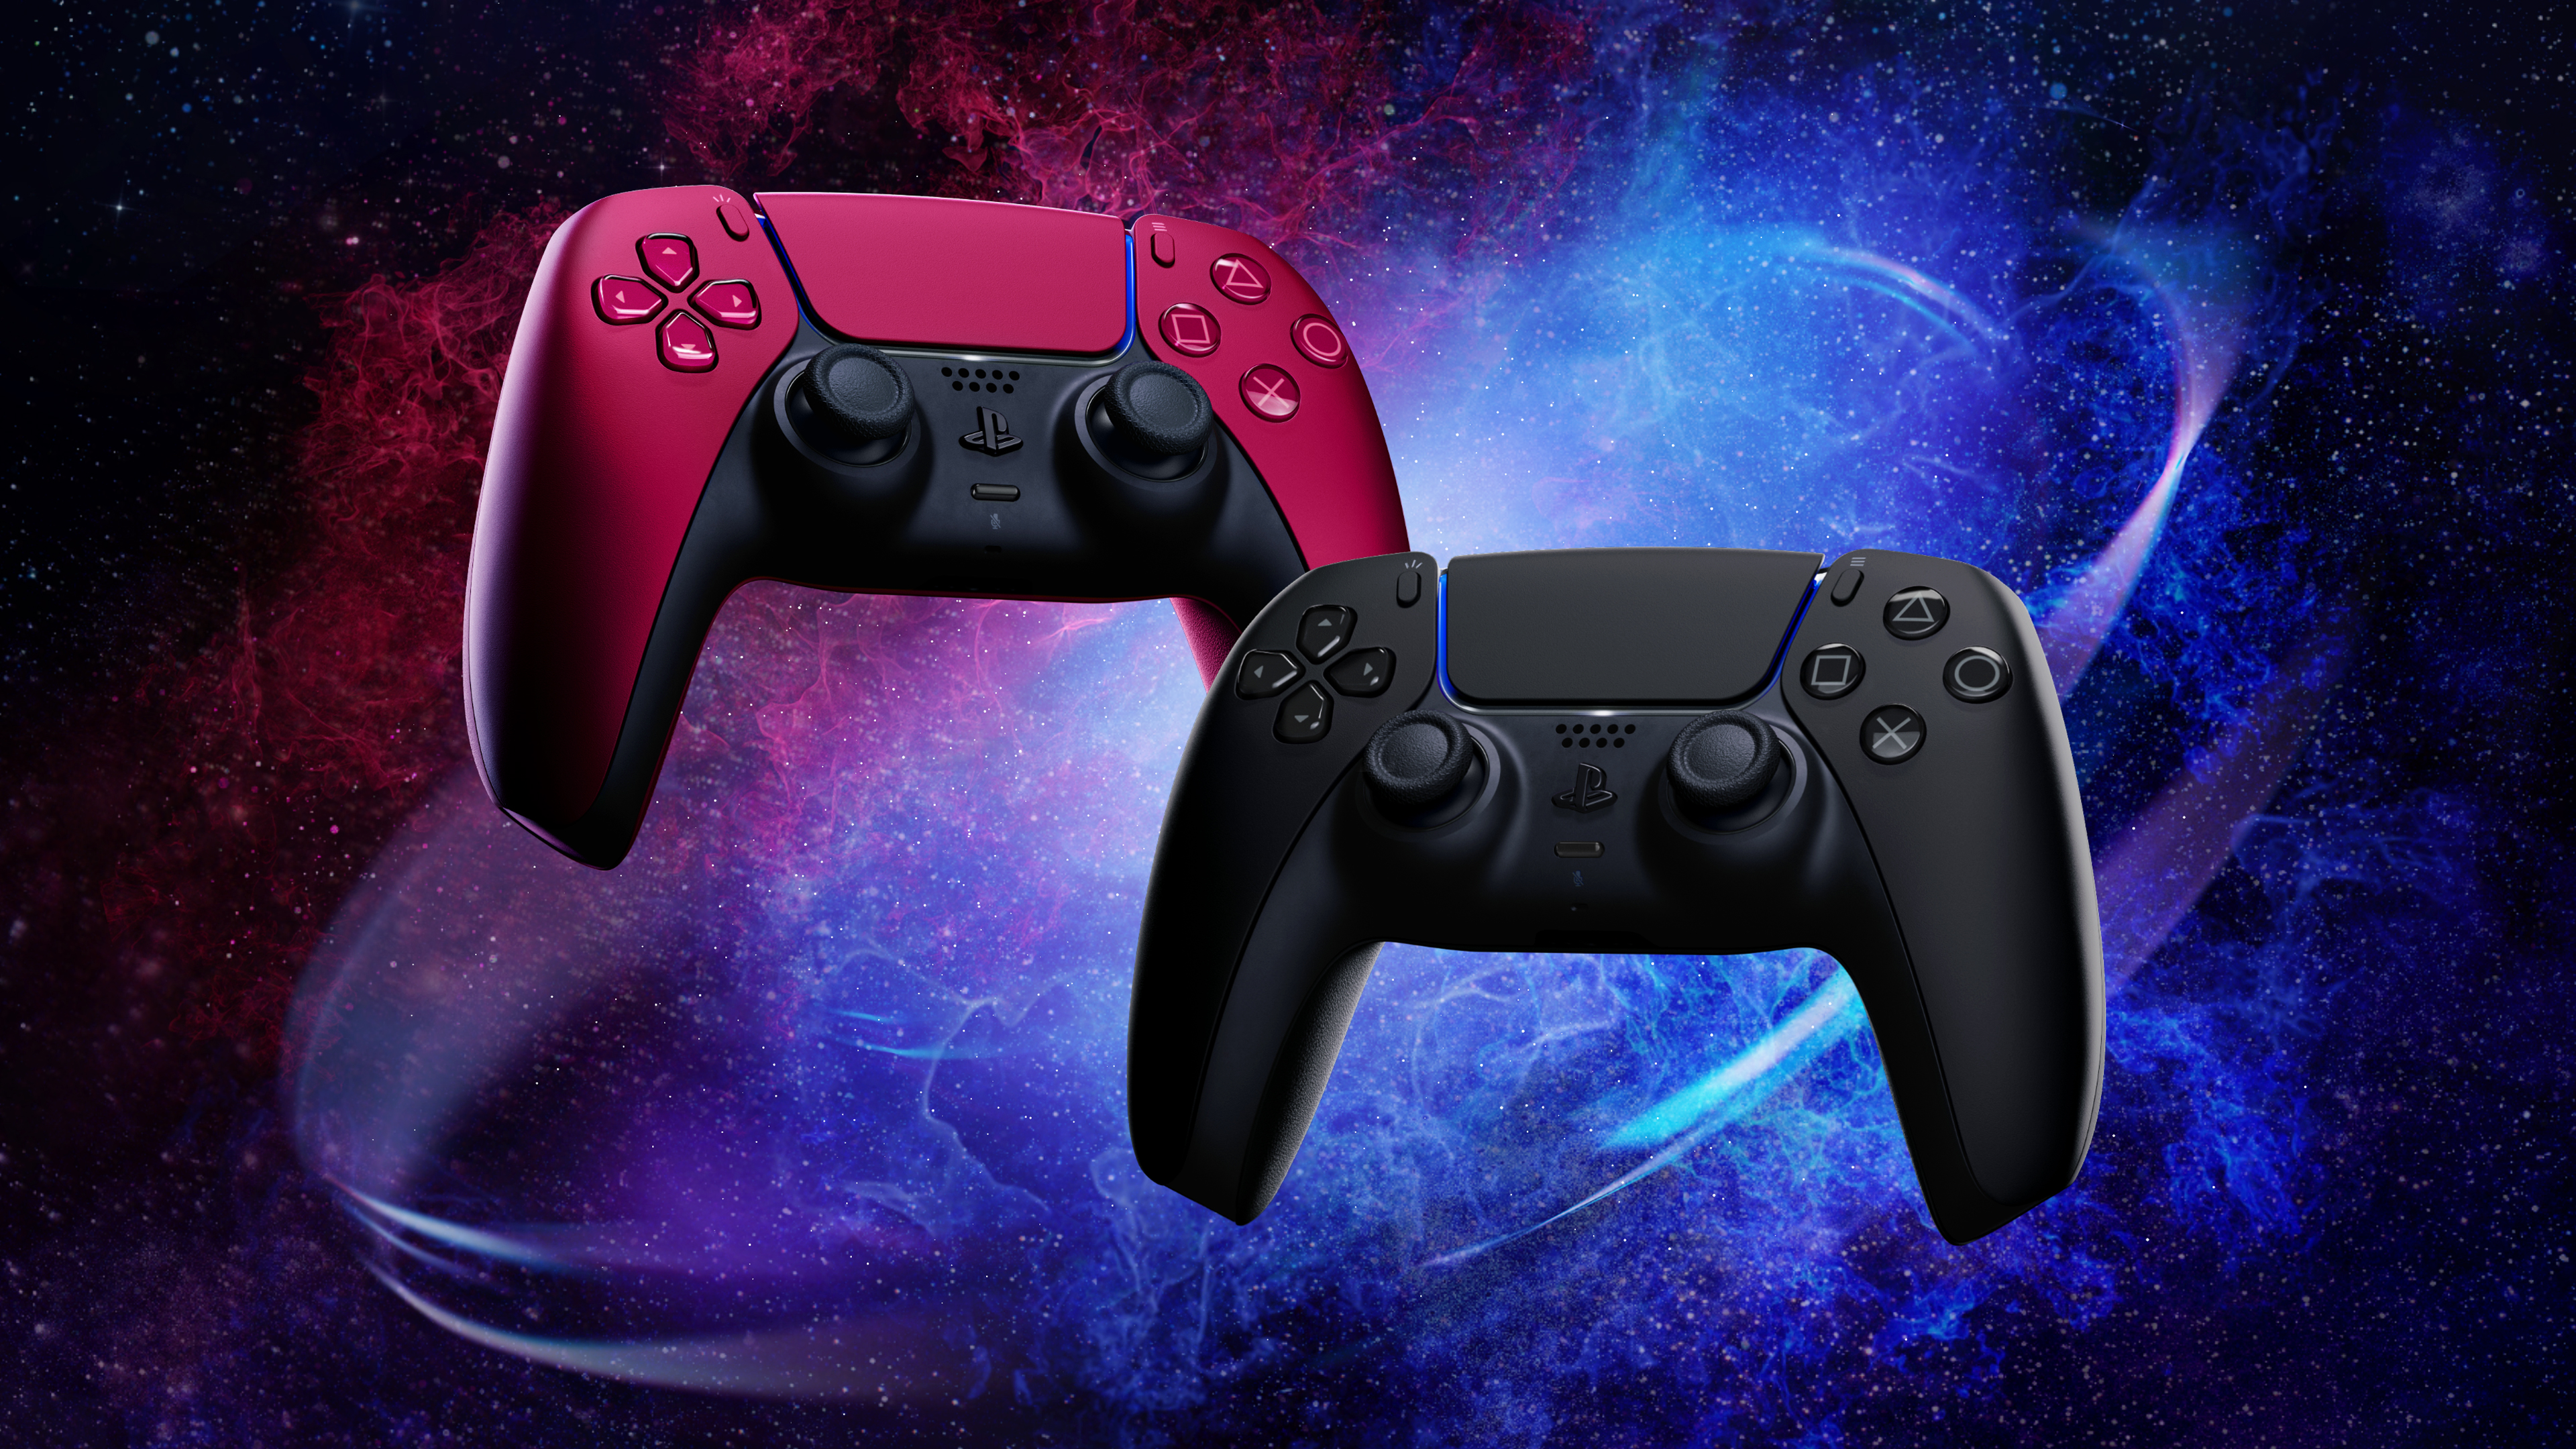 Sony reveals new DualSense controllers in red and black